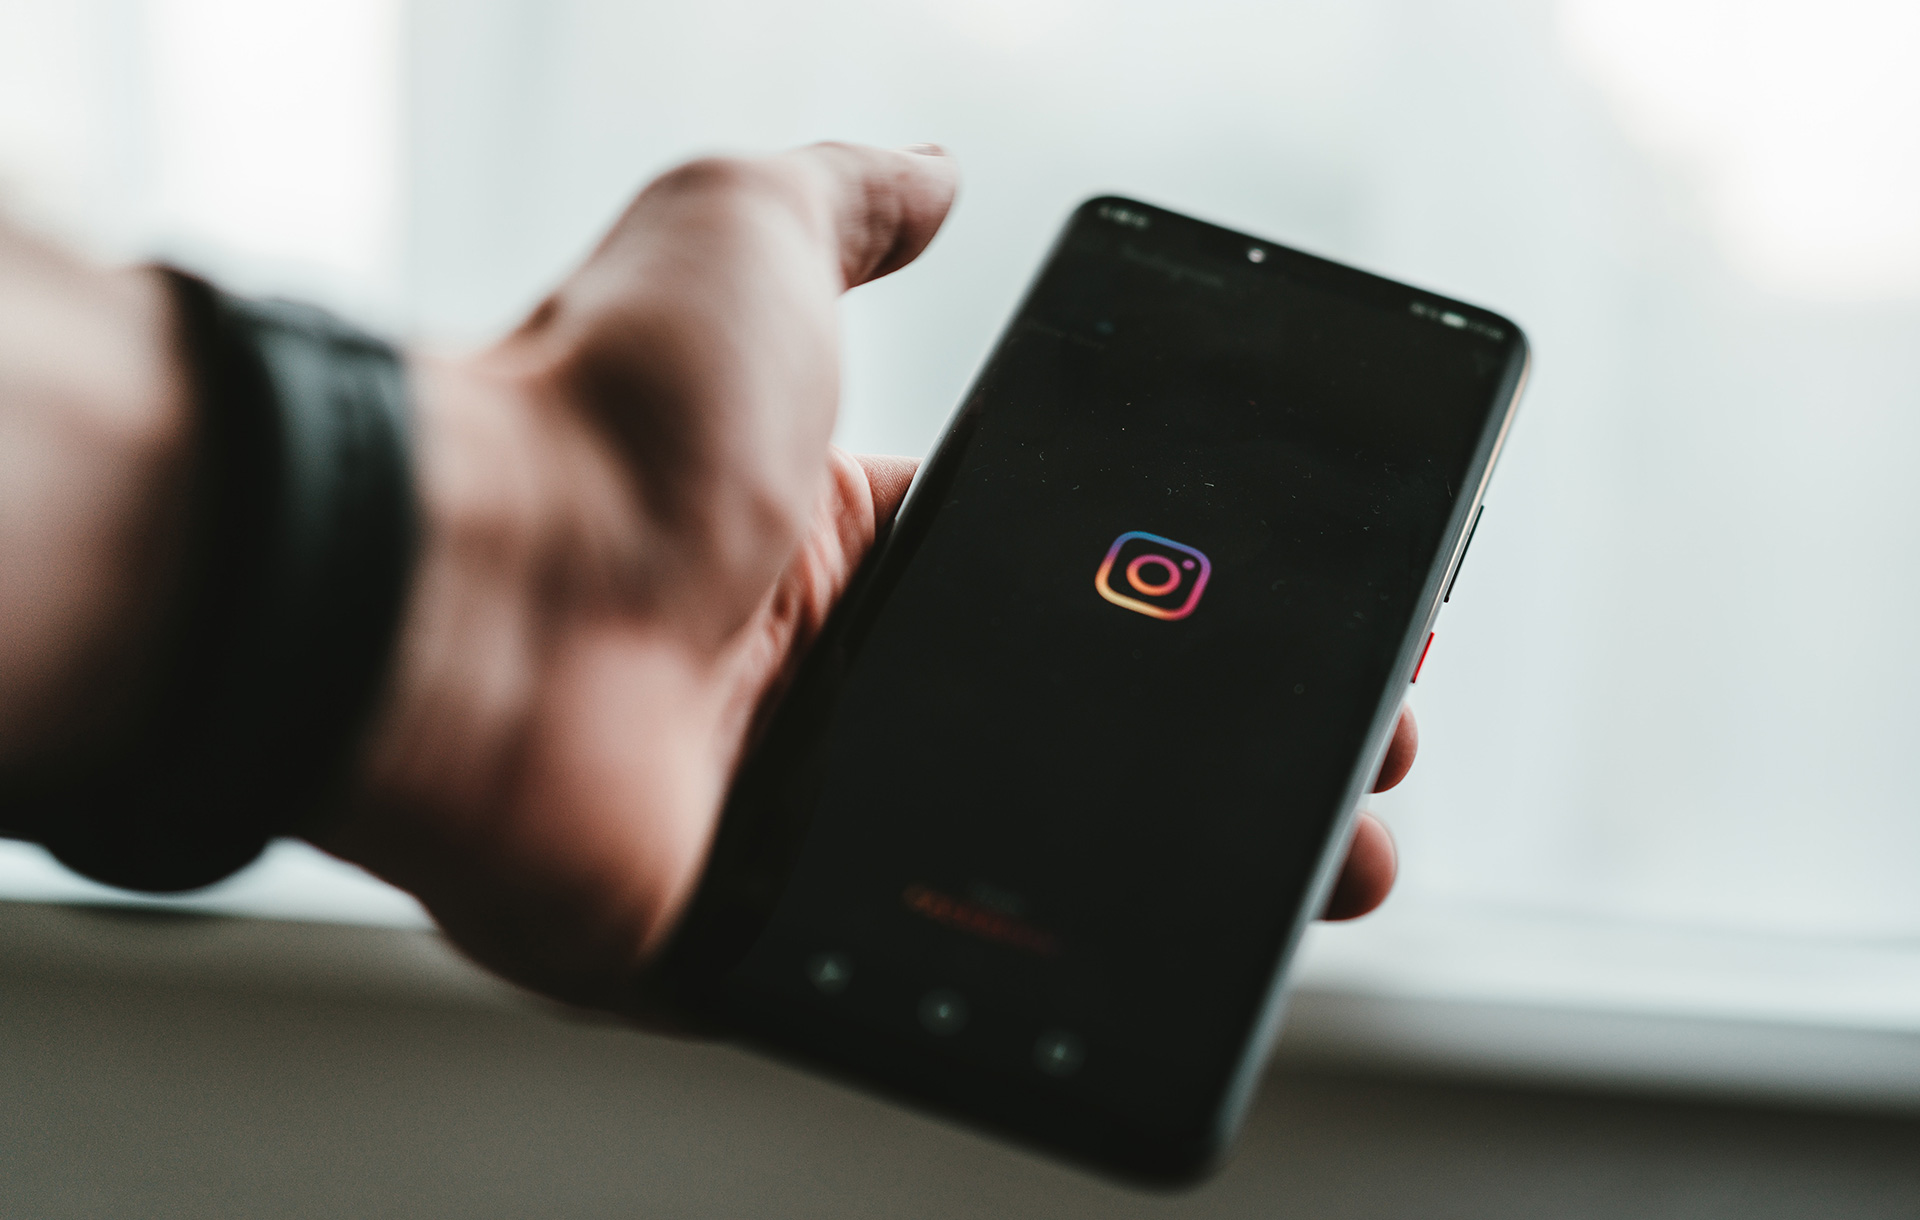 #InstagramAlgorithm Will the end of Instagram’s organic reach mean more brands flocking to Snapchat